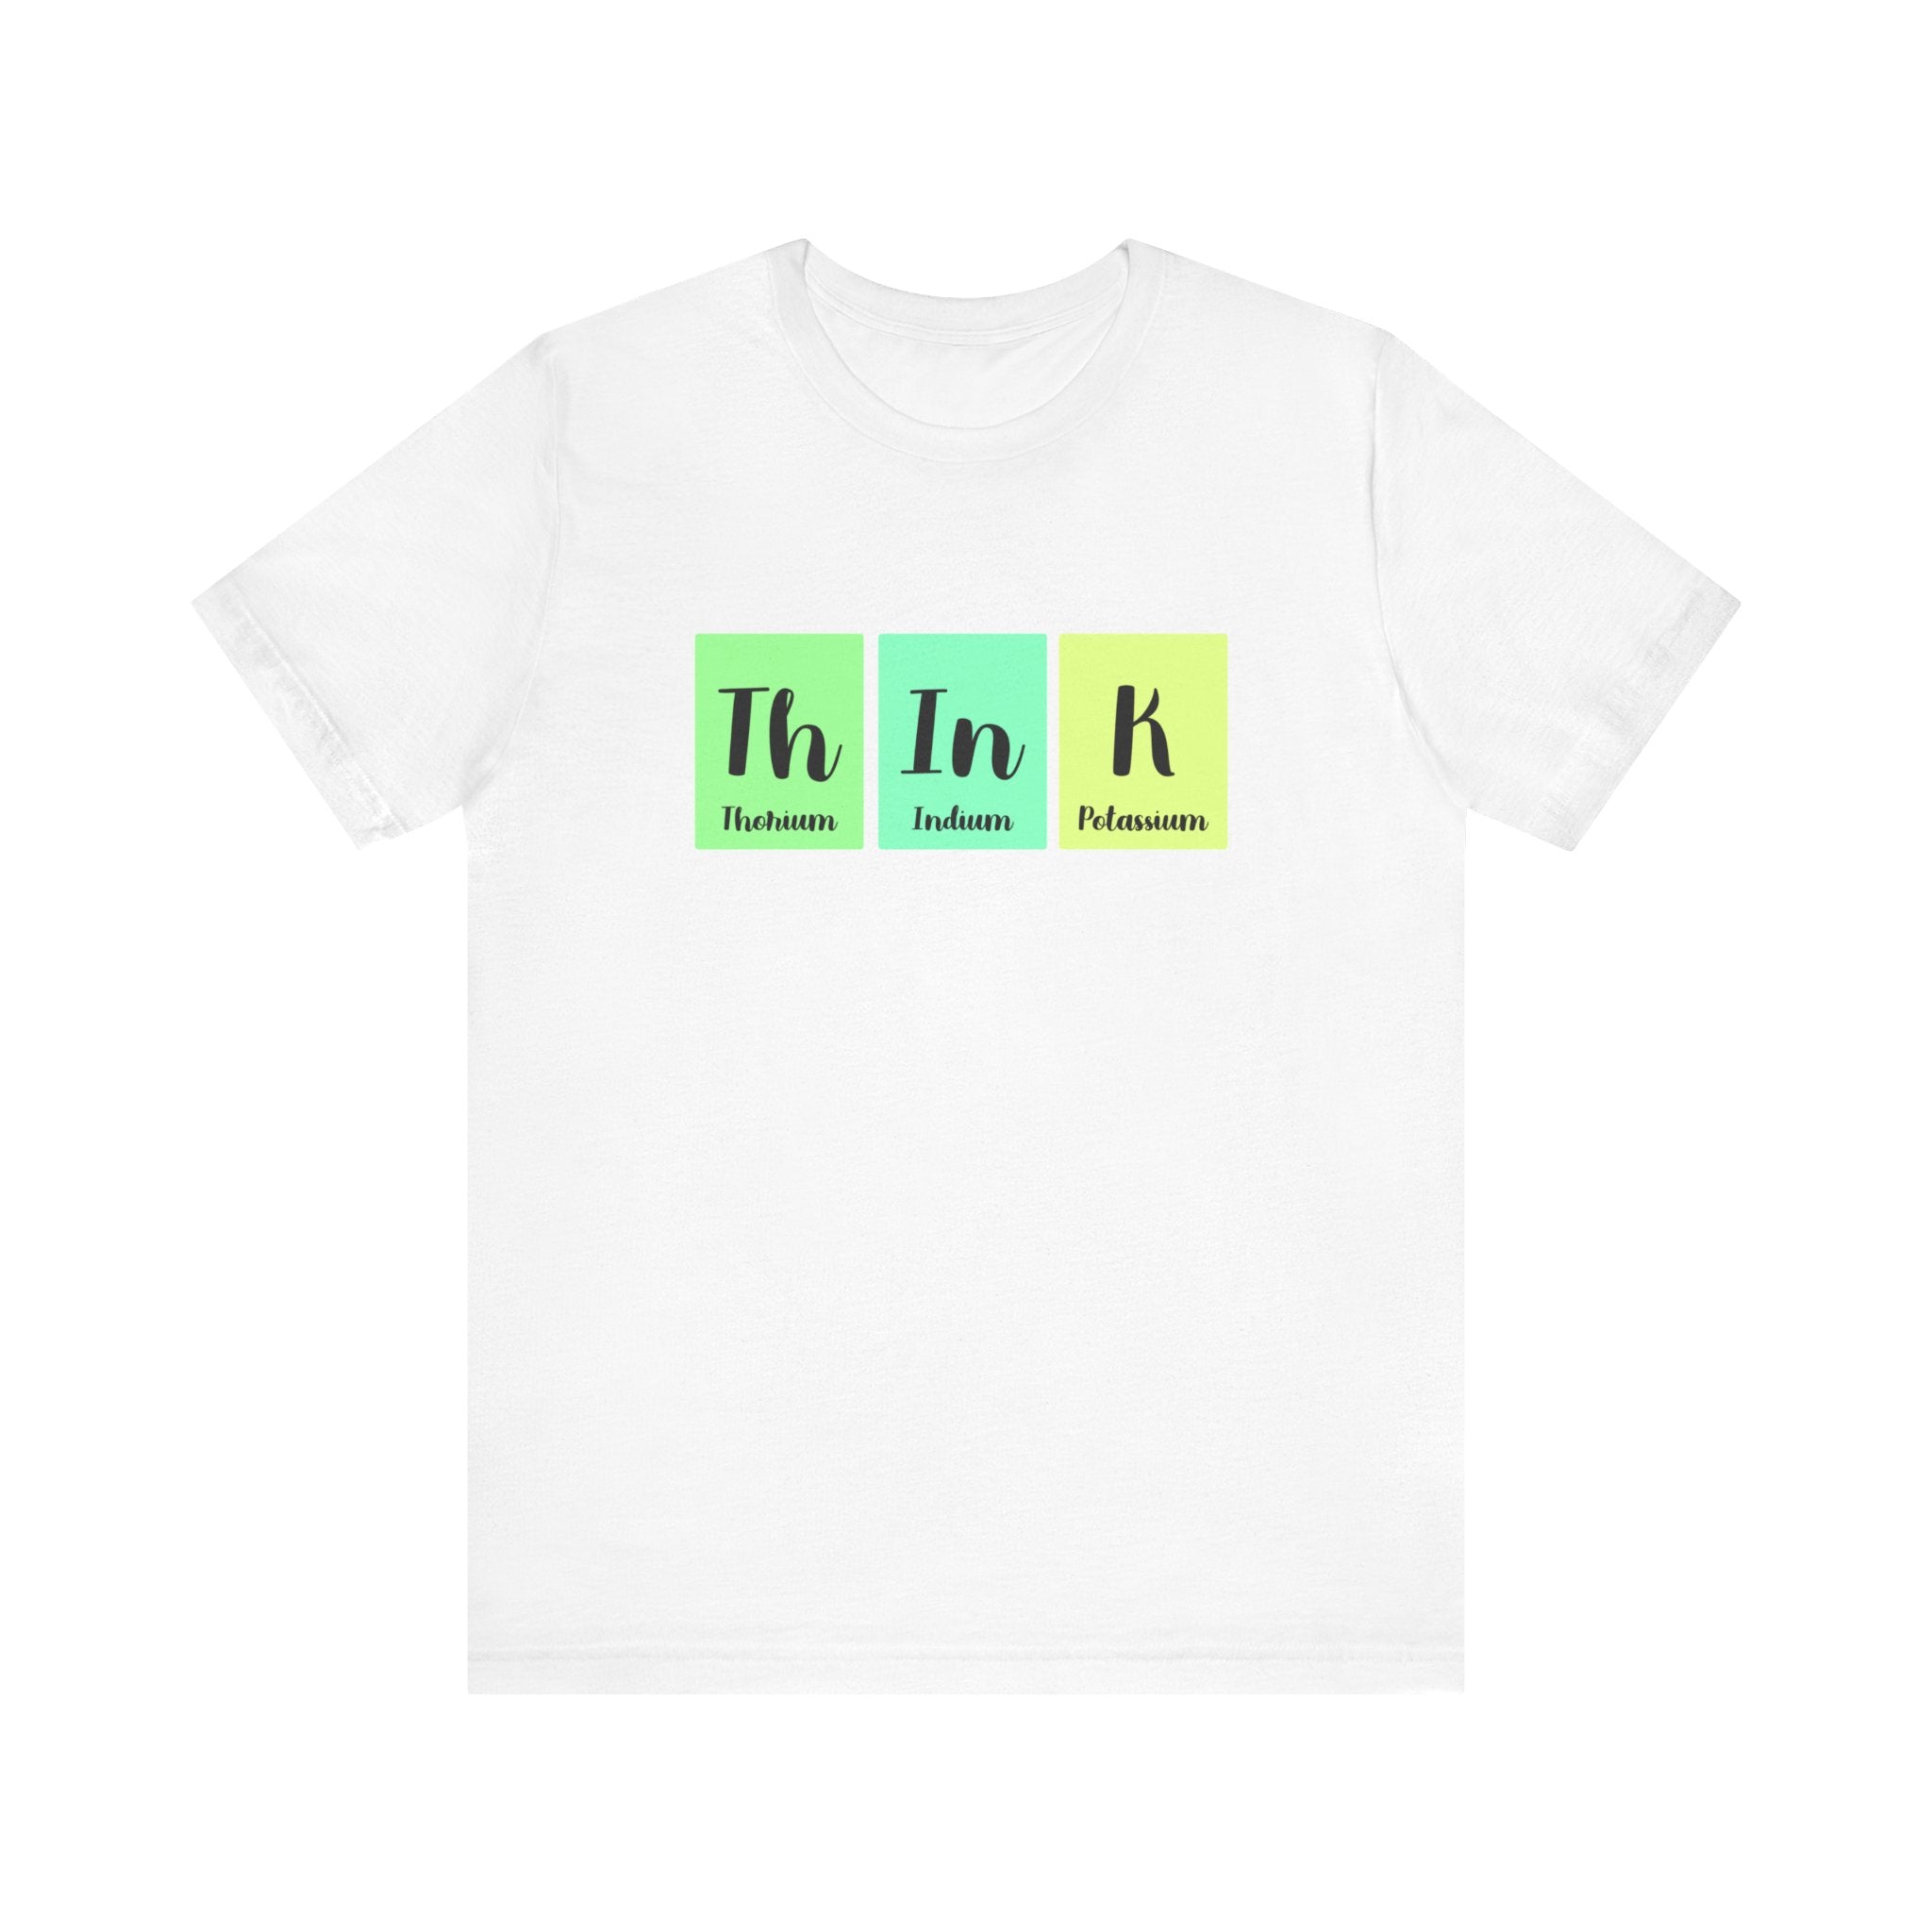 Th-In-K - T-Shirt